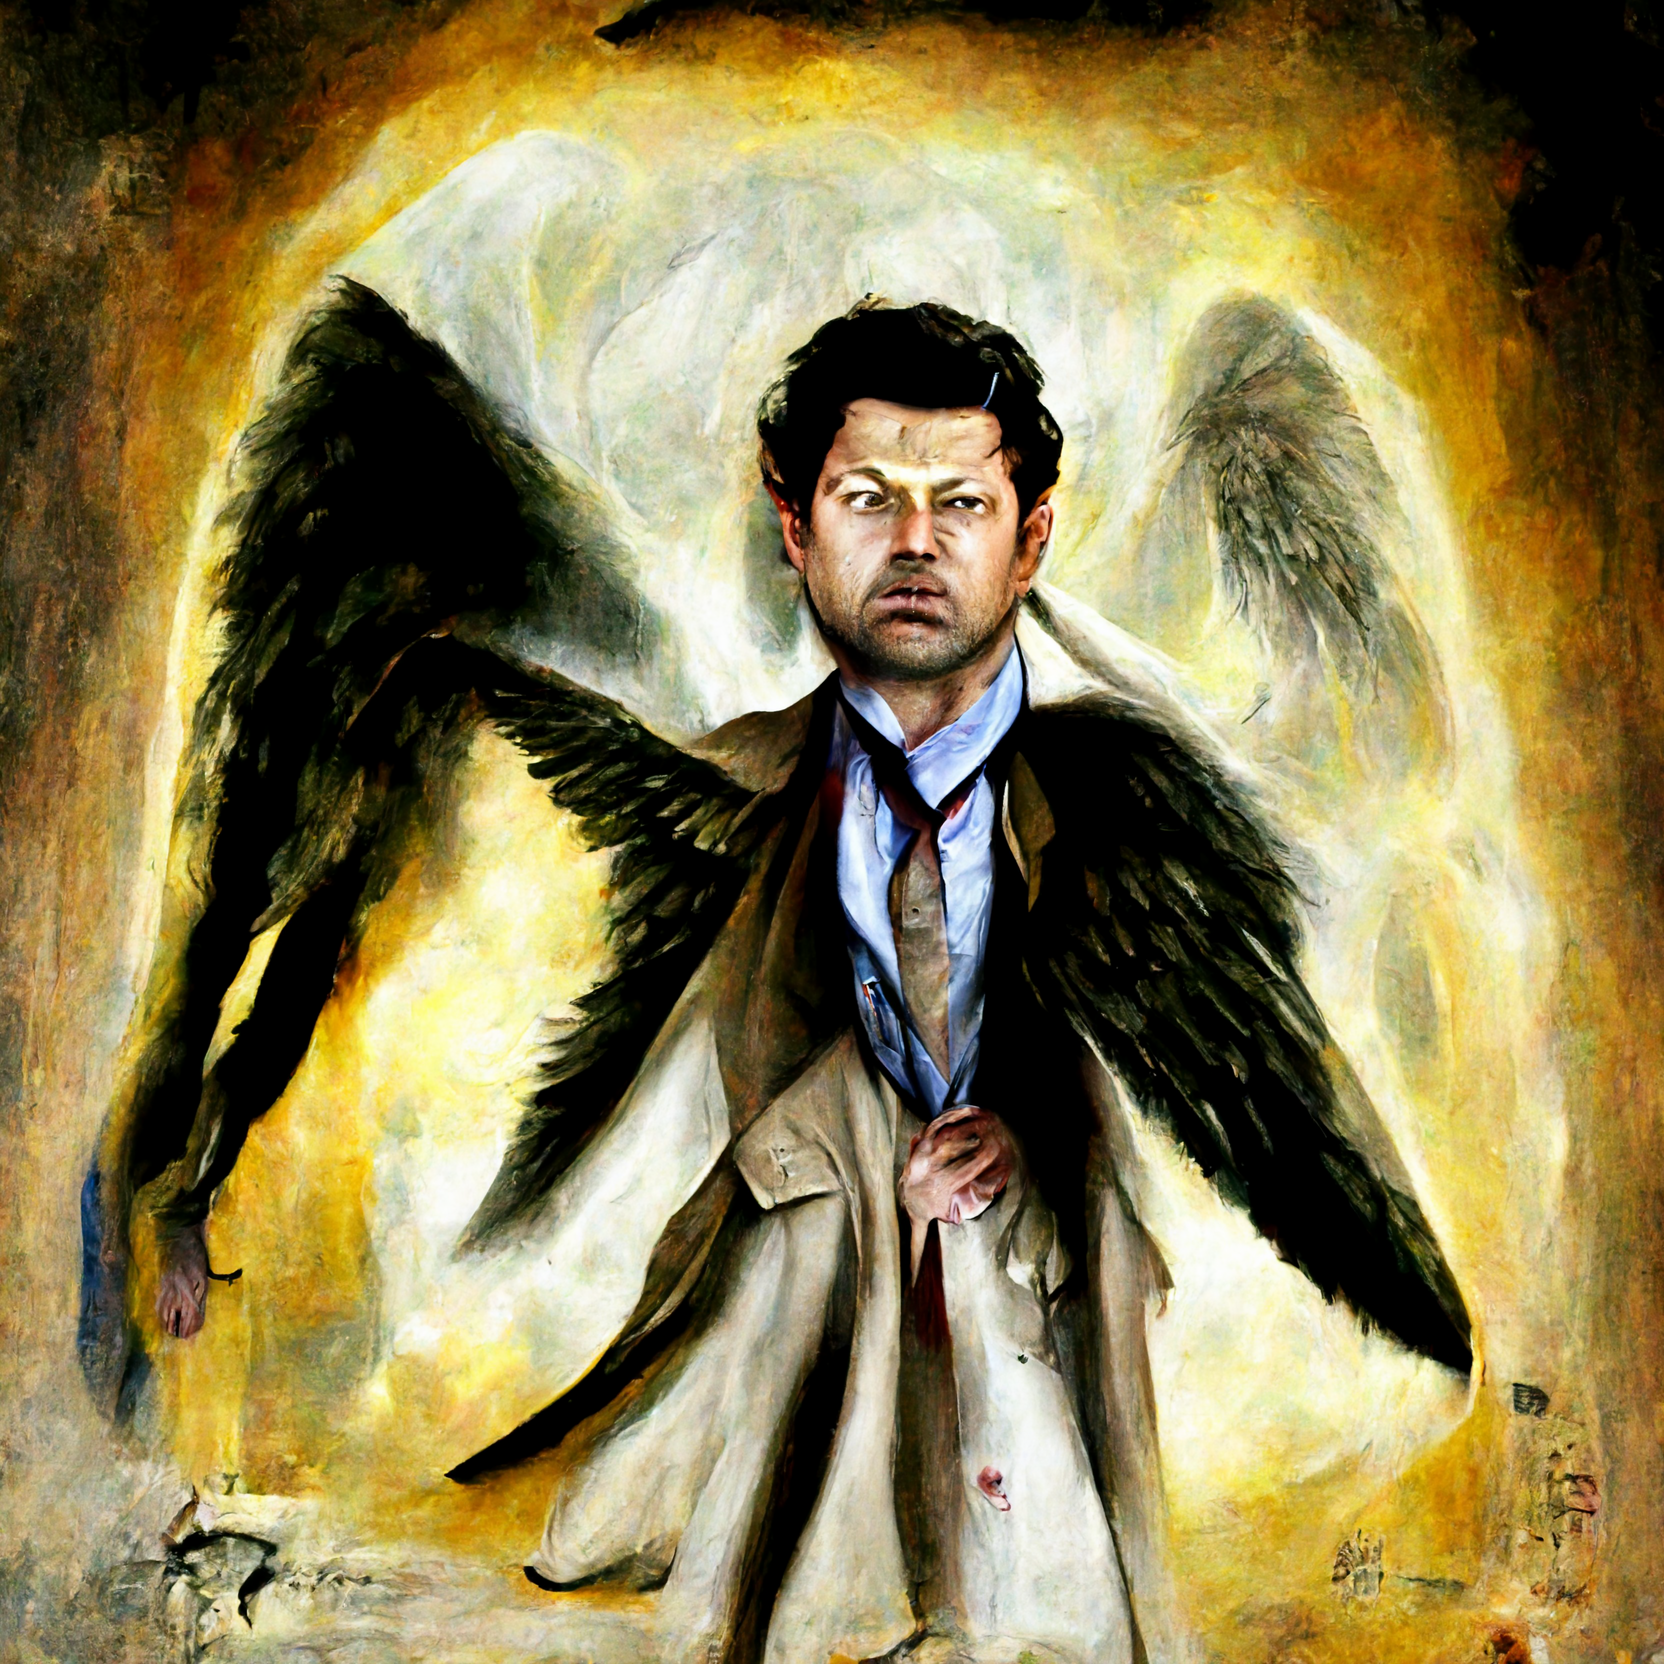 ed3f14be-c556-4104-96d5-5ca8dfefa0cd_the_true_form_of_the_mysterious_and_powerful_angel_castiel_famous_award-winning_painting.png